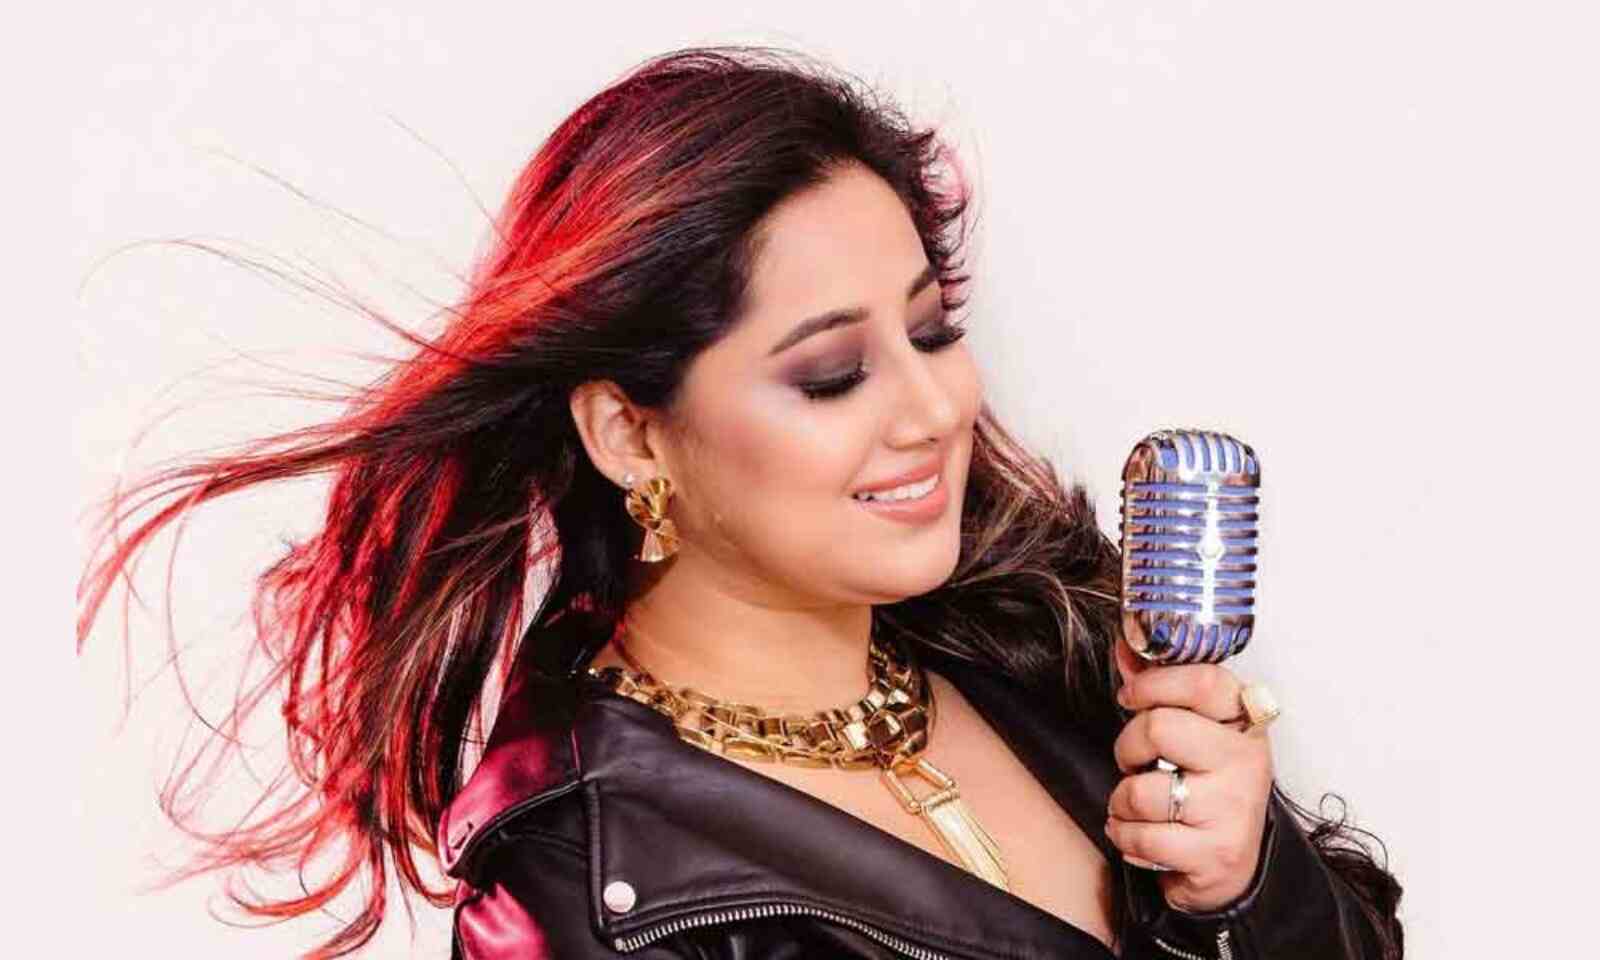 Singers Expected To Look A Certain Way Is Added Pressure Payal Dev